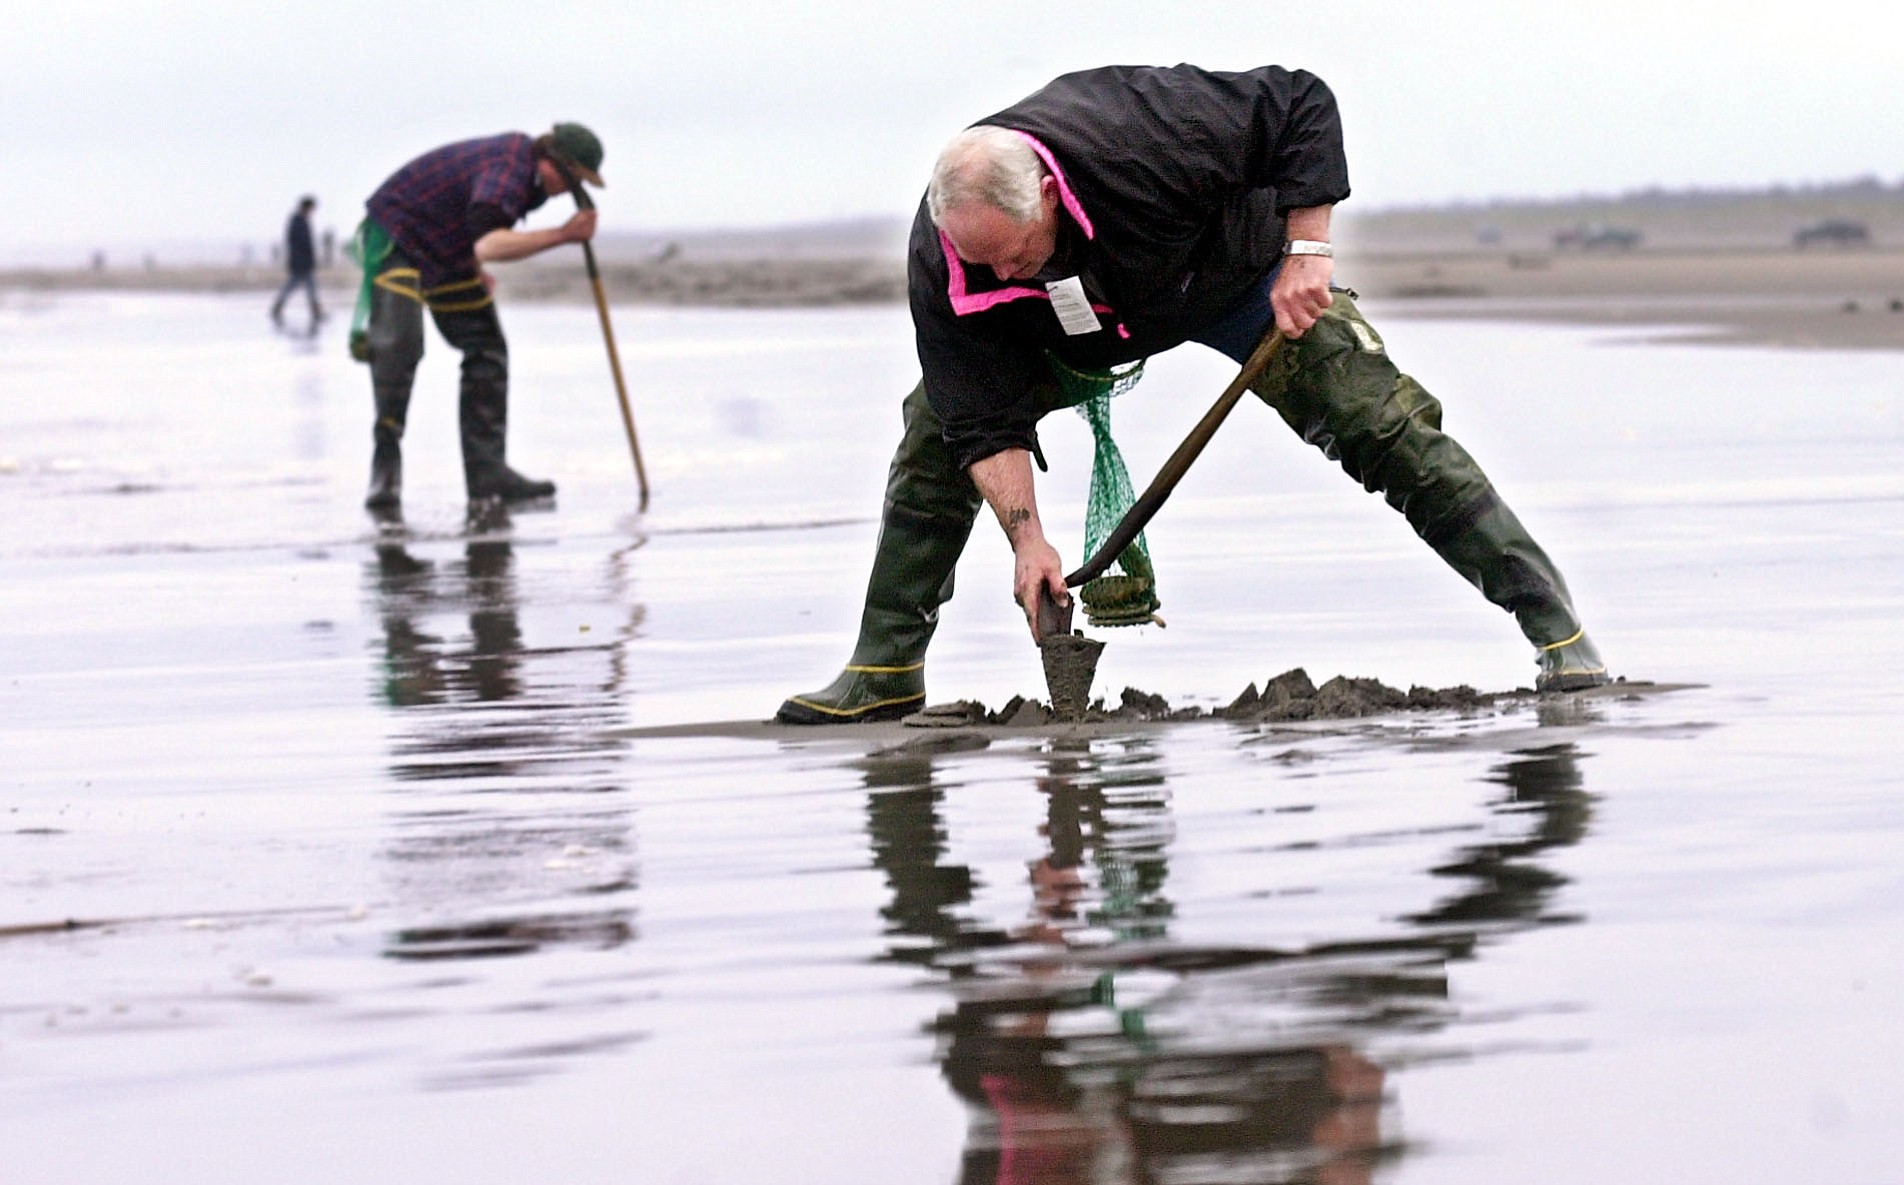 Clam diggers provide tourist income to coastal communities during winter and spring.